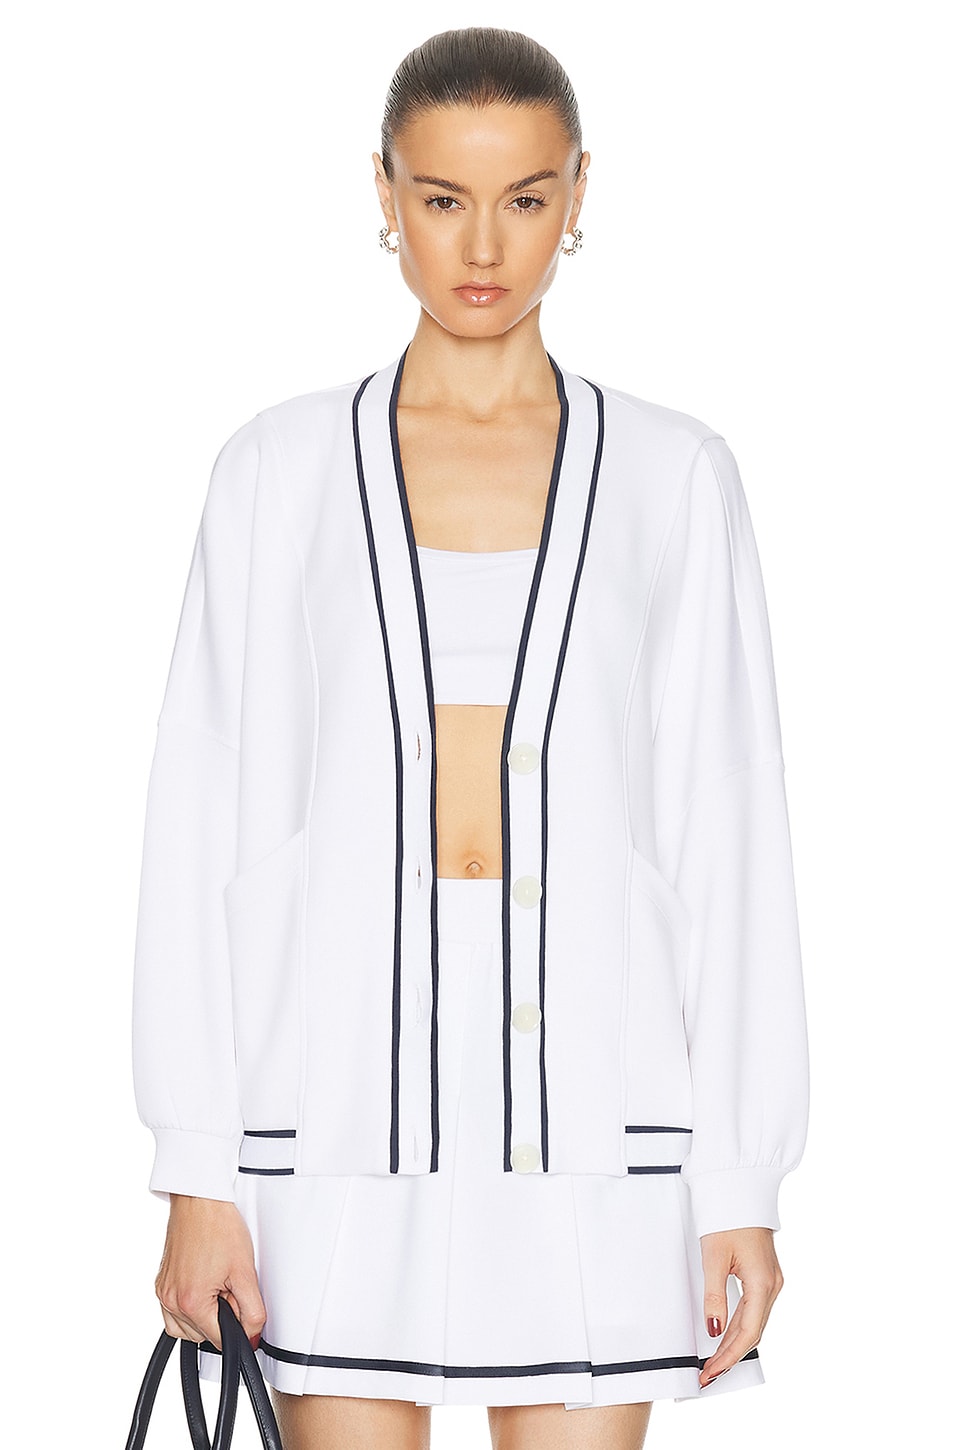 Image 1 of Varley Decker Off Court Cardigan in White